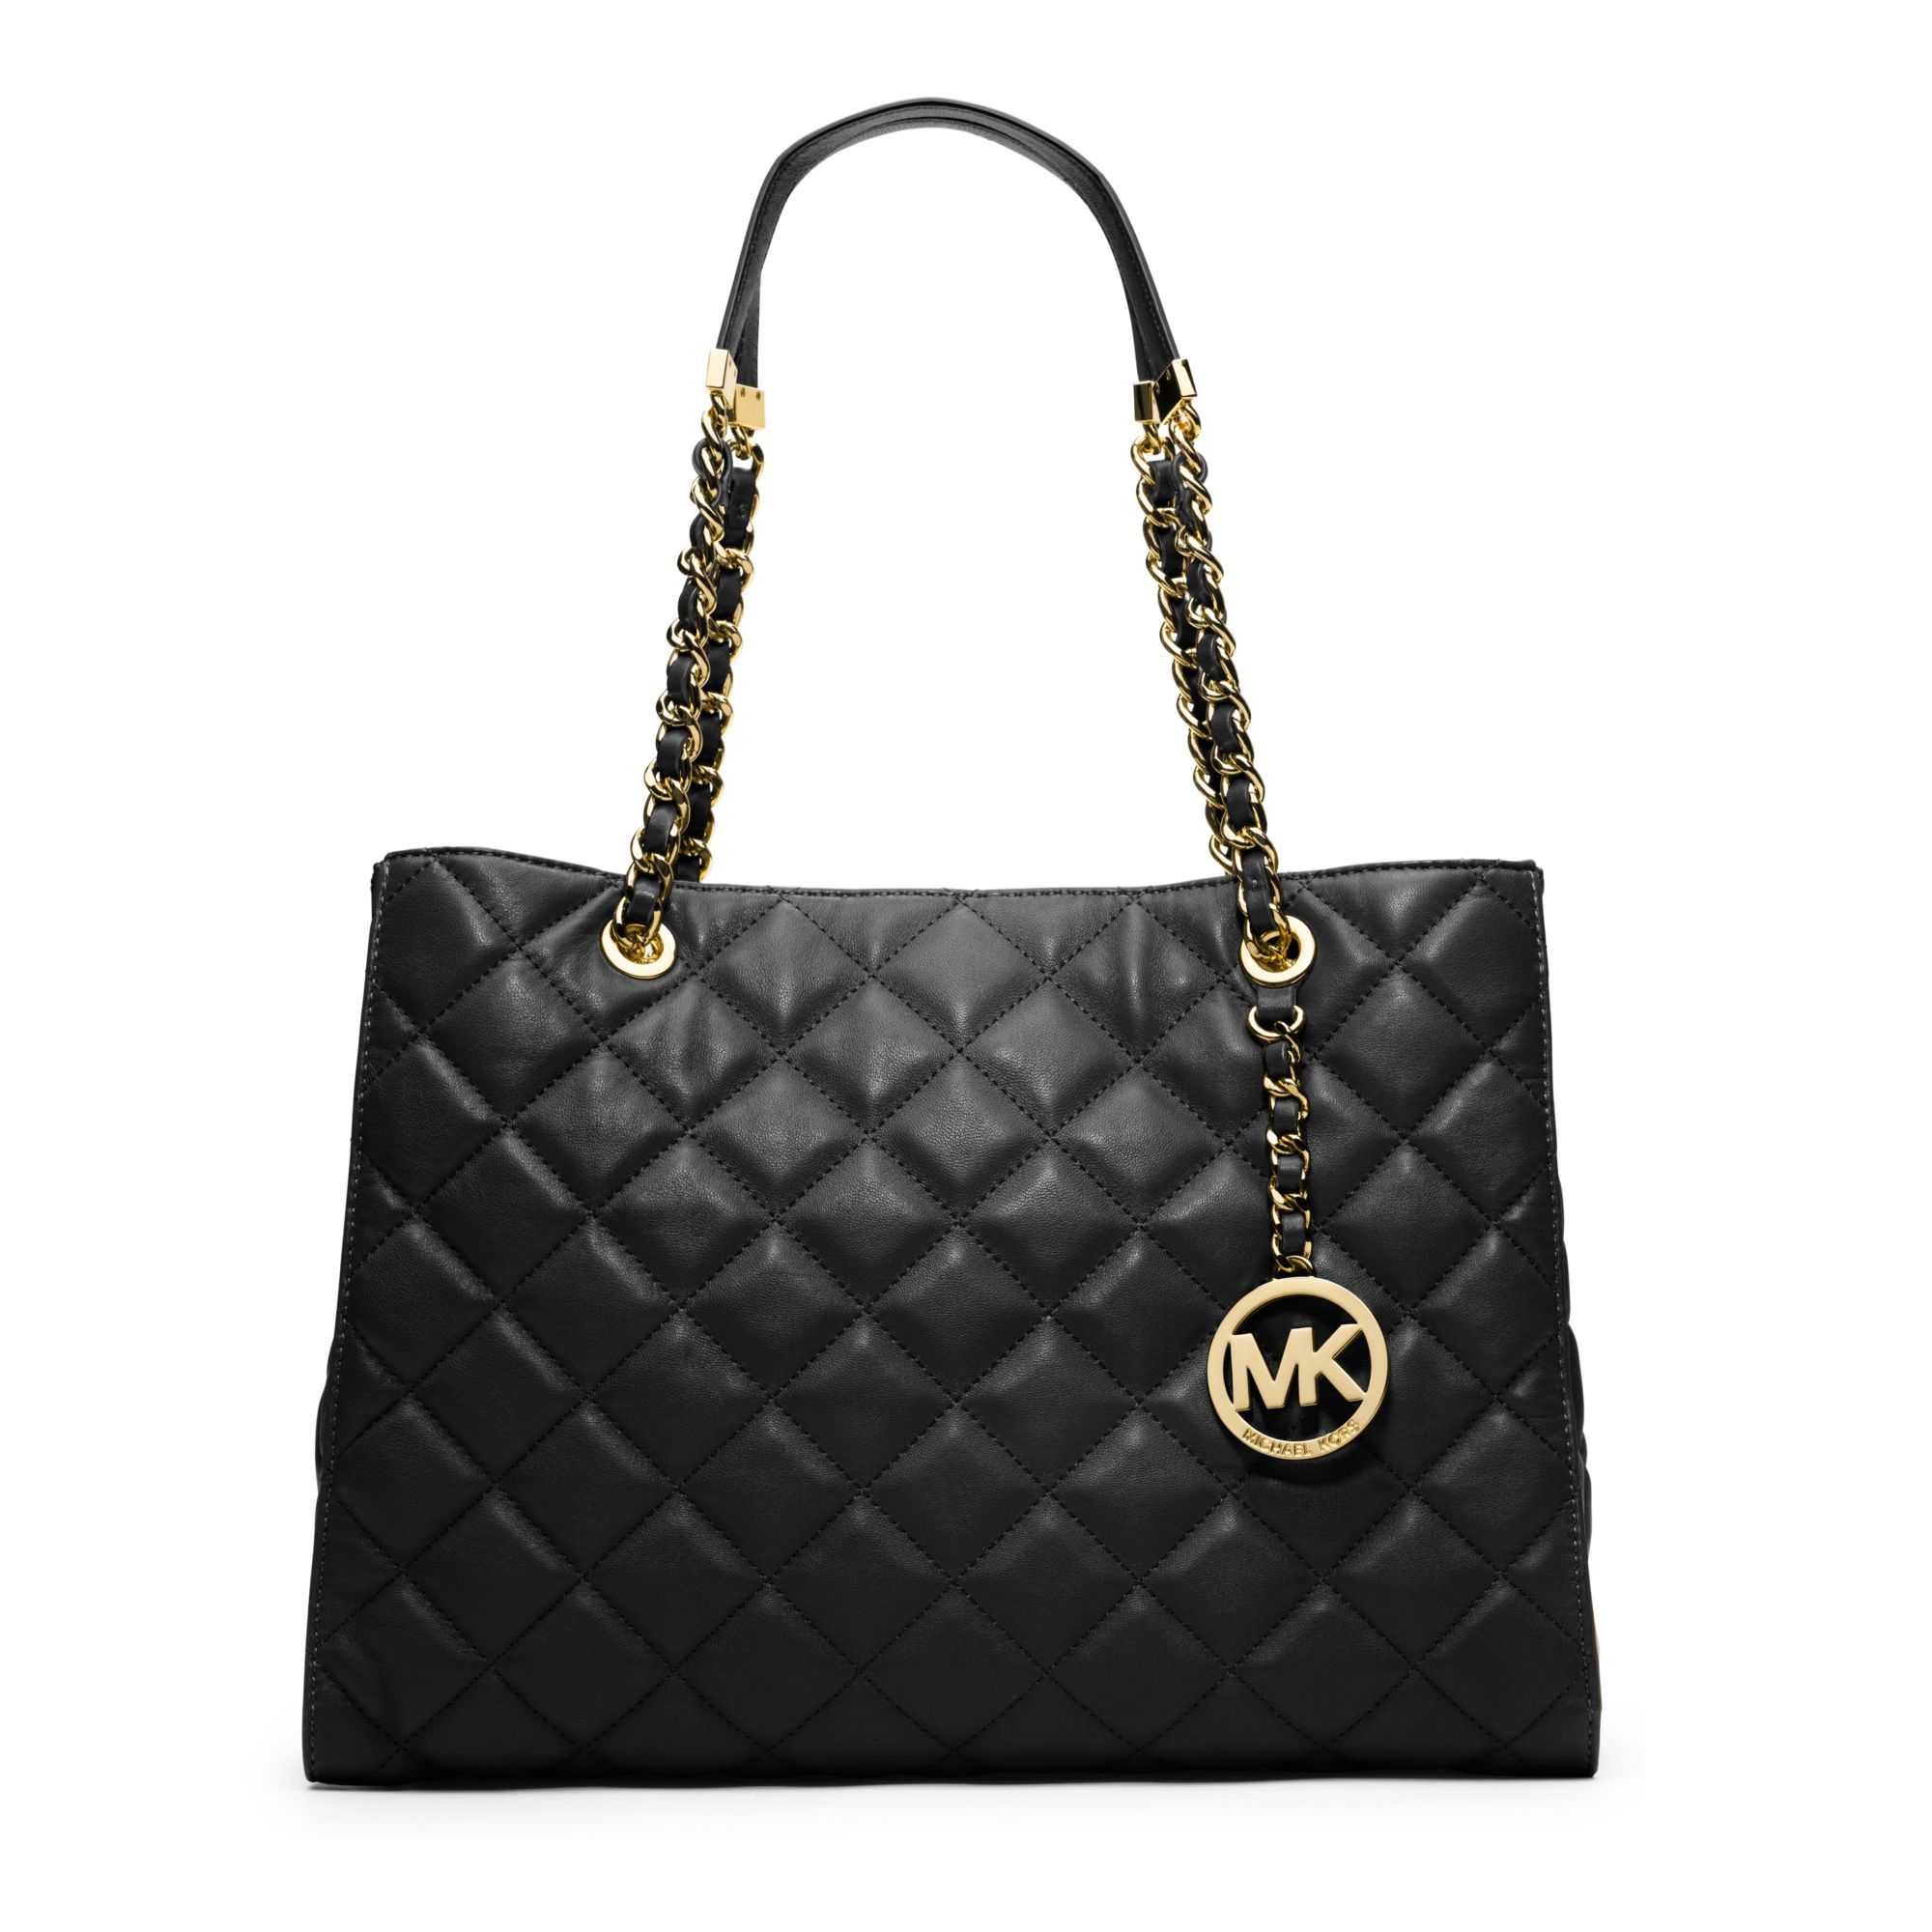 Michael Kors Quilted Leather Tote in Black - Lyst